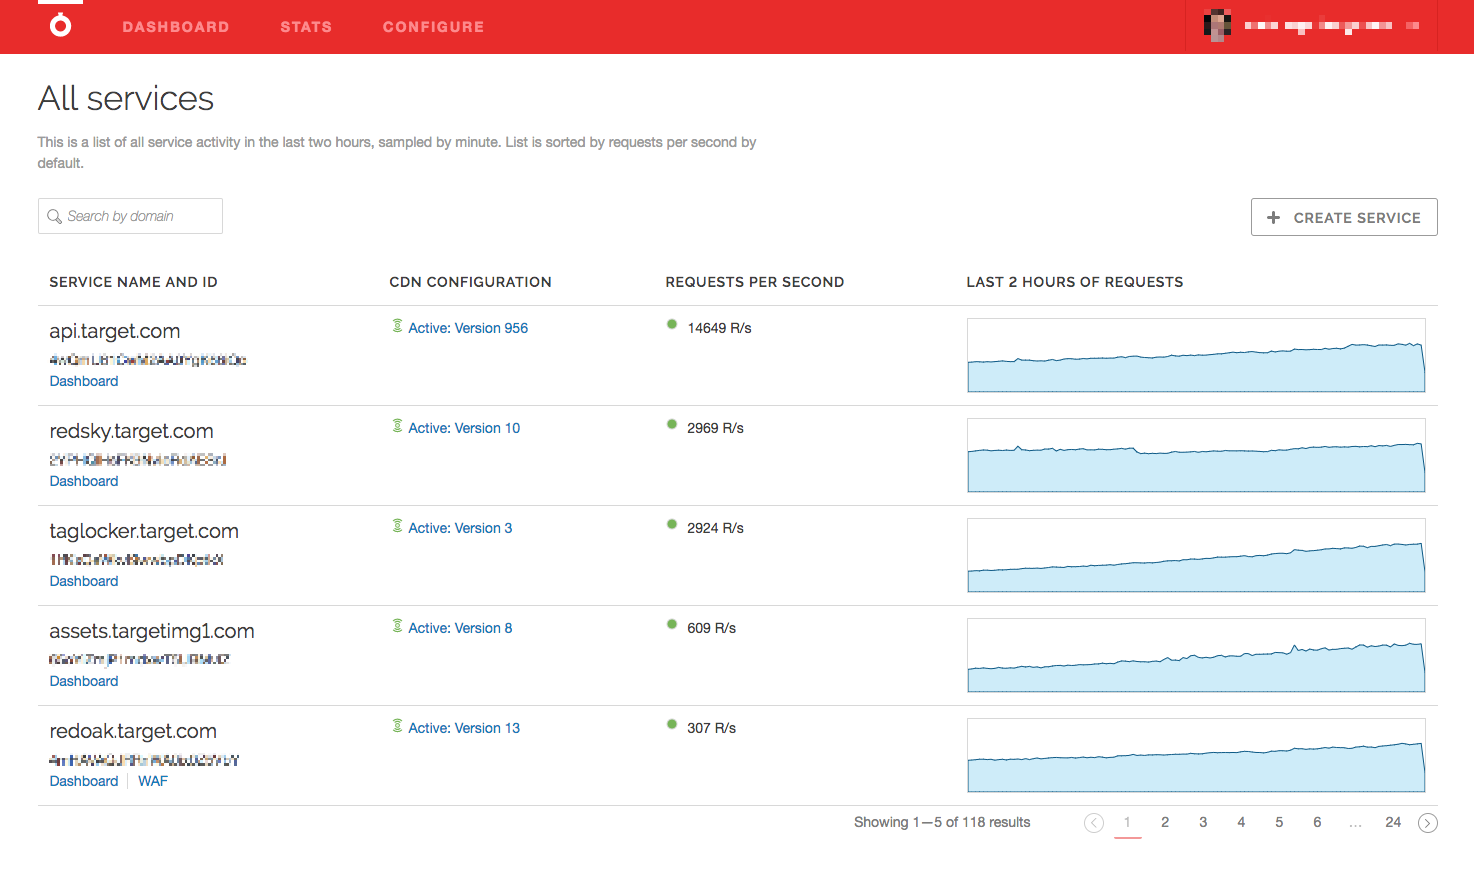 a dashboard view of Target's API services showing CDN configuration and requests per second. Service names shown on the dashboard include "api.target.com," "redsky.target.com," "Taglocker.target.com" and more